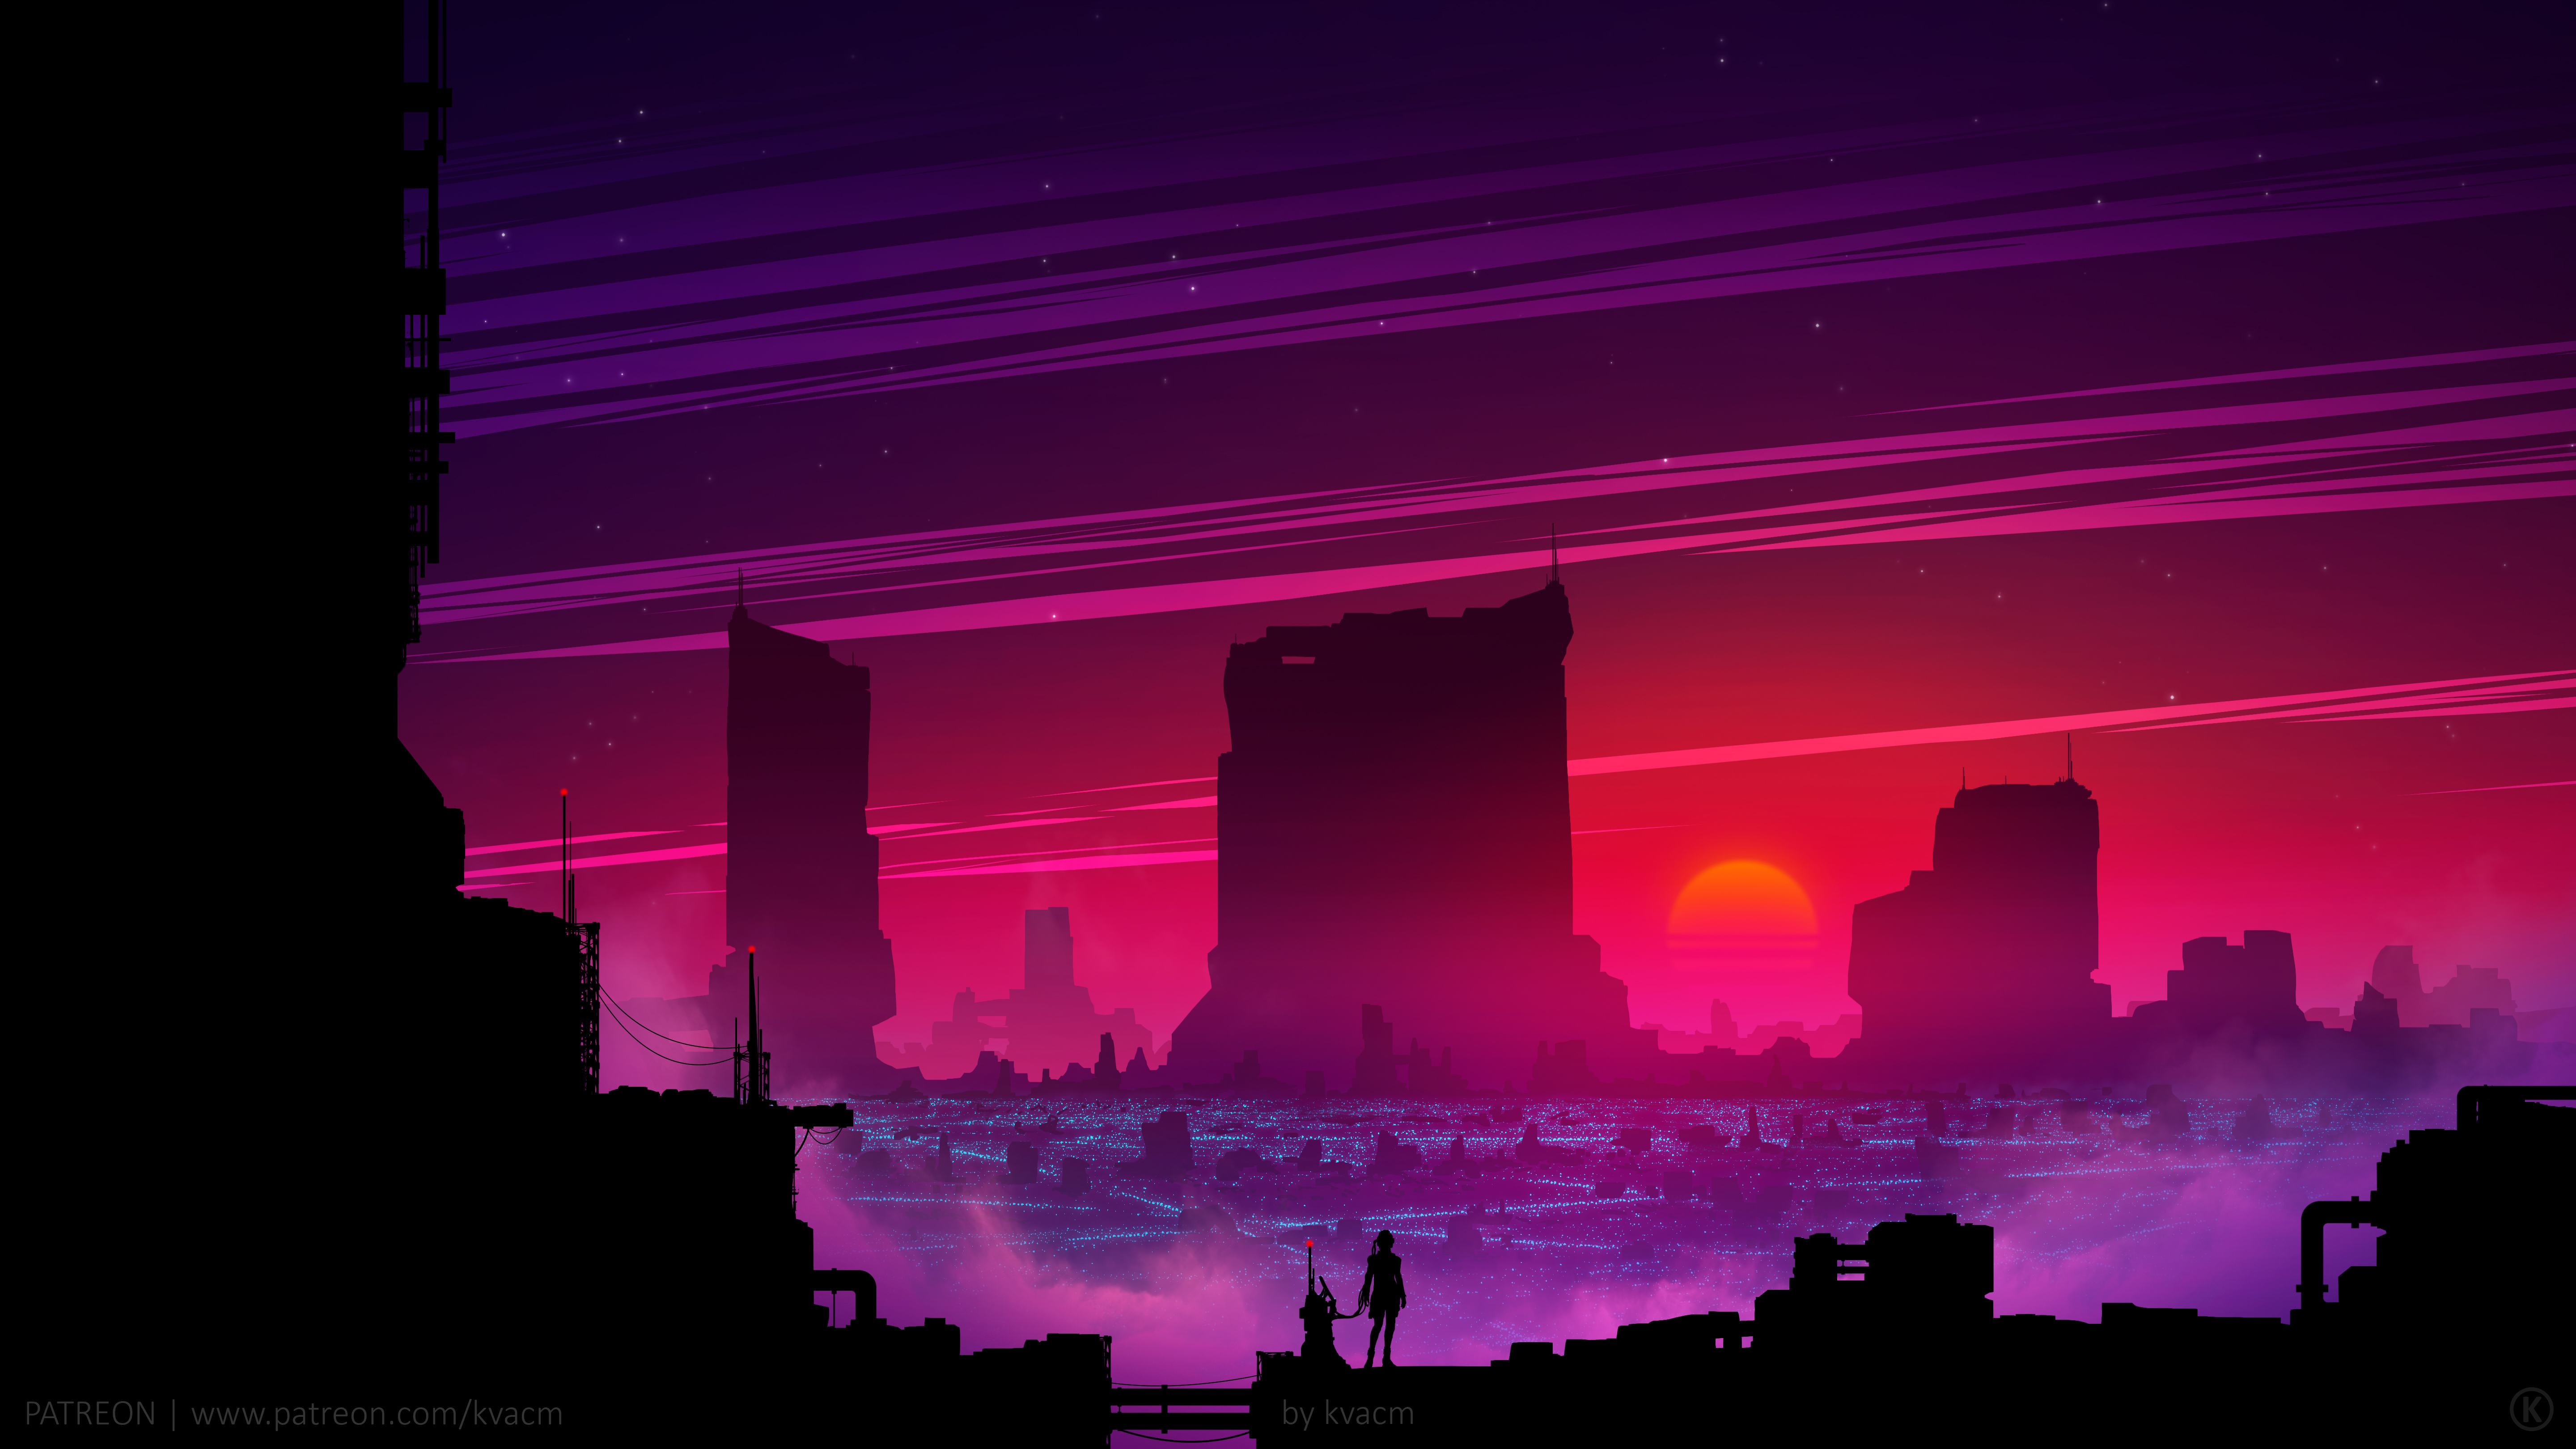 Synthwave Desktop Wallpaper Posted By Ryan Simpson